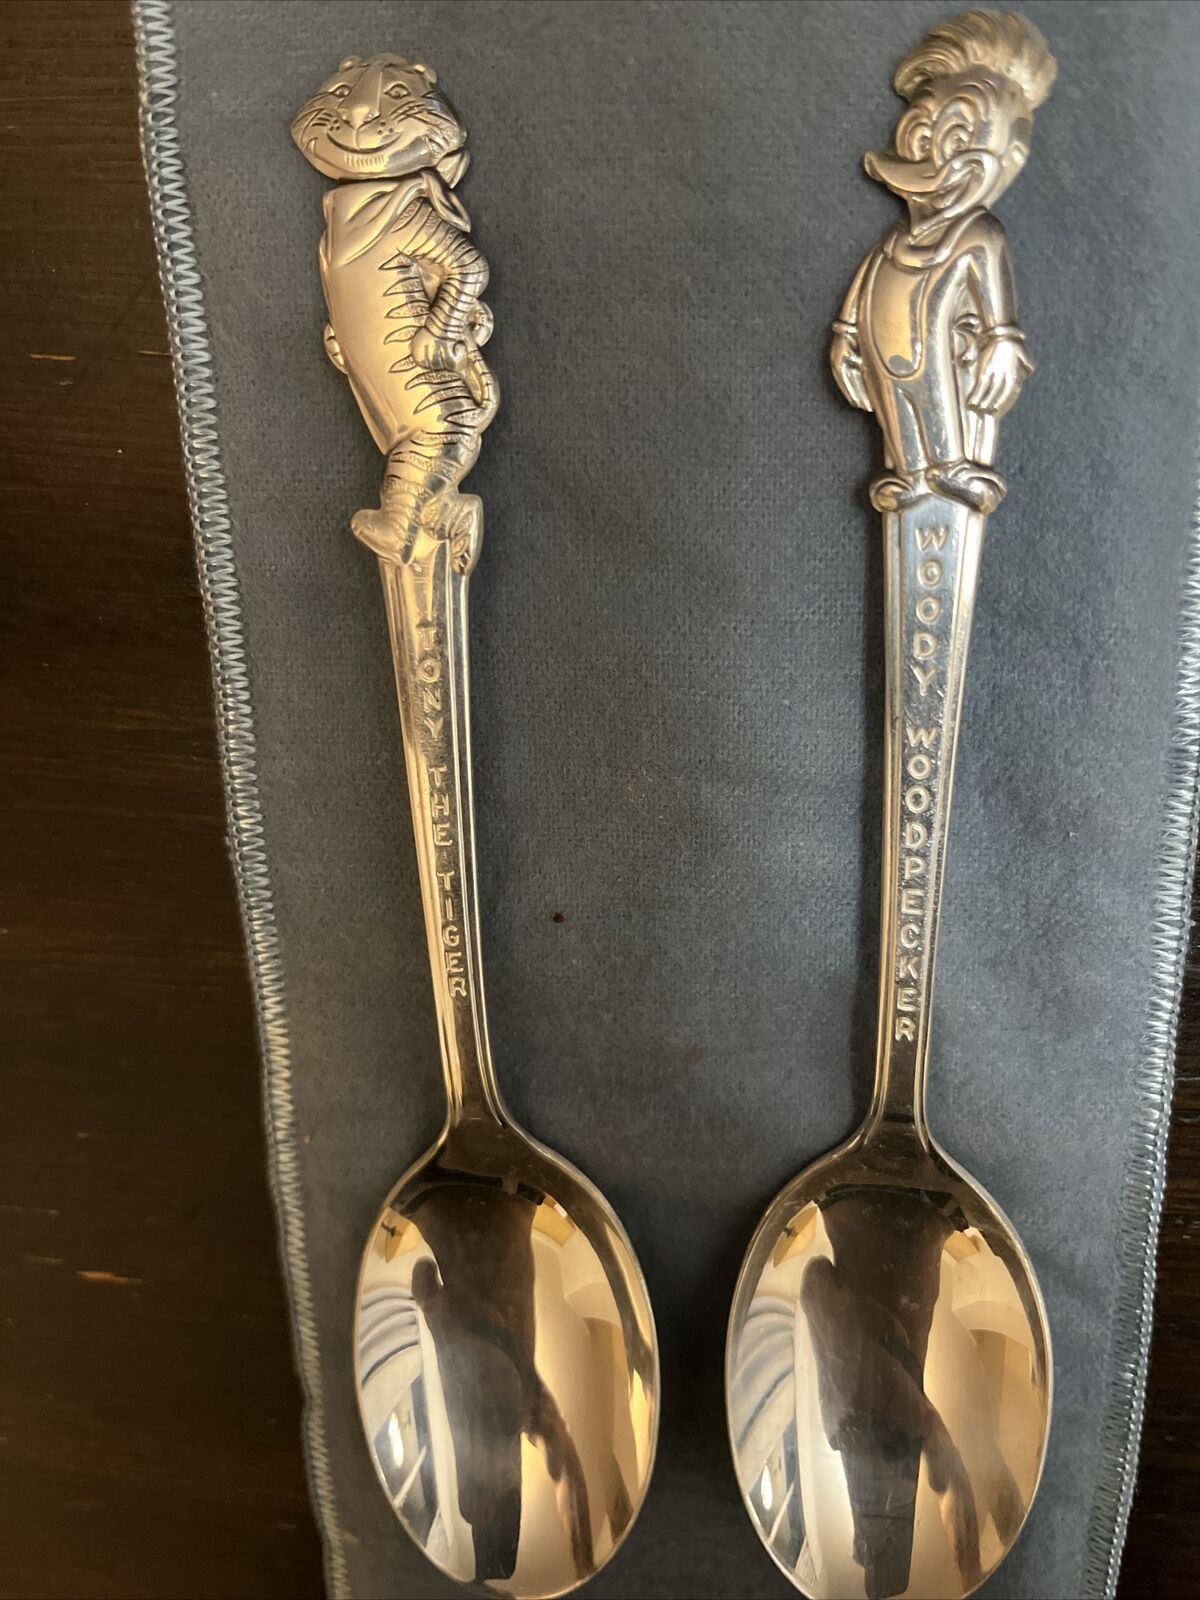 Vintage Kellogg's Tony the Tiger & Woody Woodpecker Spoon Silver Plate 1965 IS